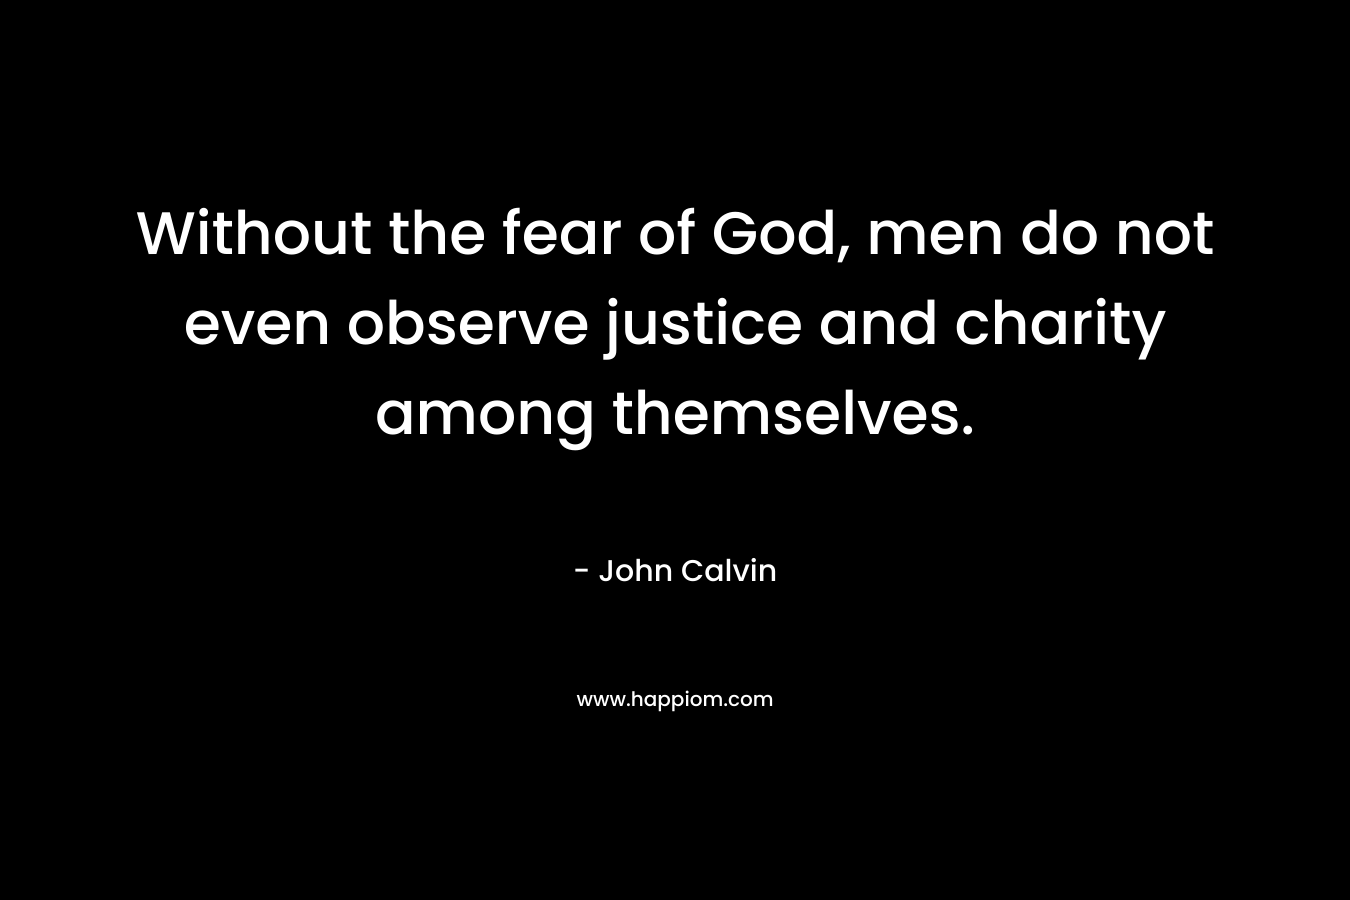 Without the fear of God, men do not even observe justice and charity among themselves. – John Calvin